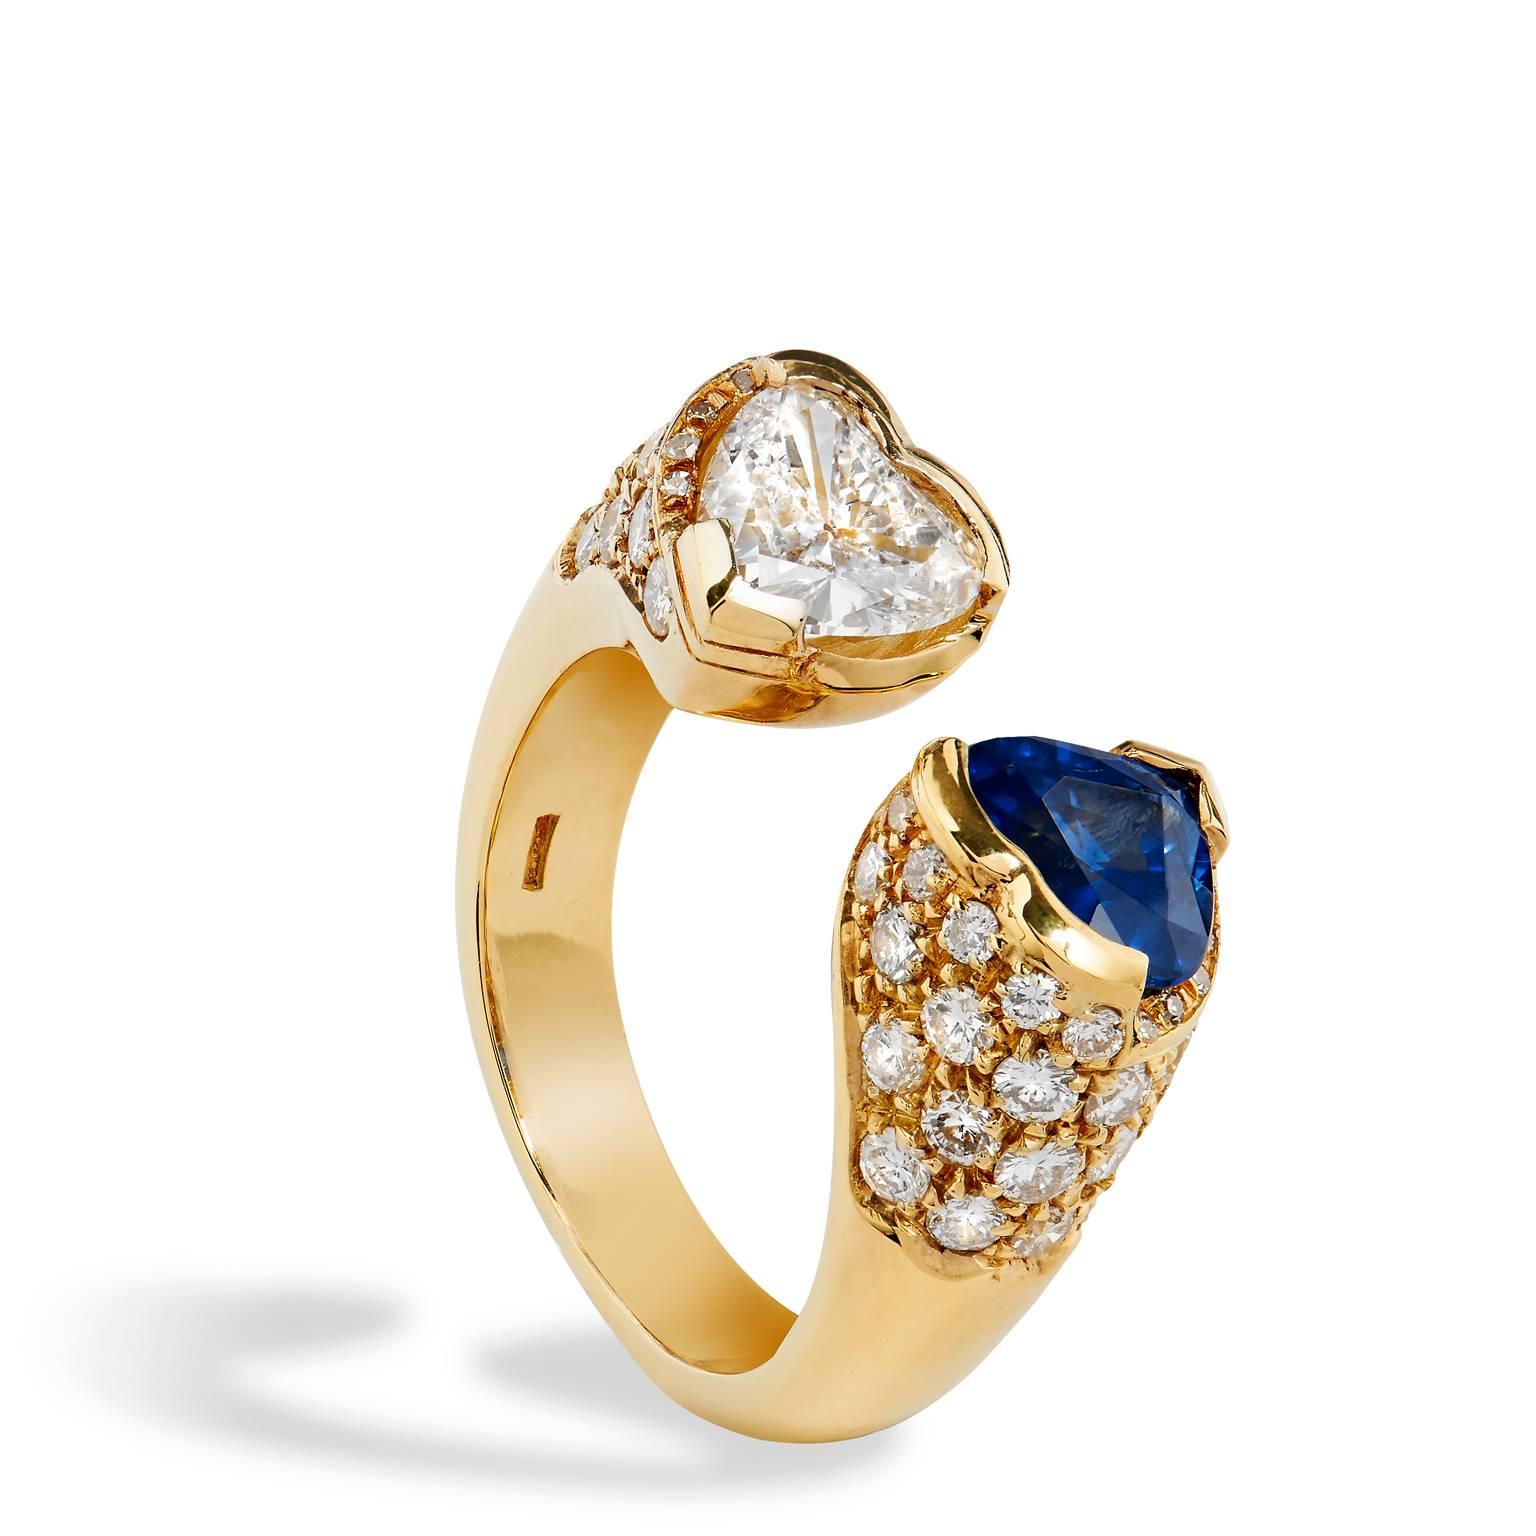 Moi et Toi 1.14 ct Blue Sapphire & .78 ct Heart Shaped Diamond 18 kt Gold Ring

This is a Moi et Toi ring.  Meaning “you and me” in French, their name alone puts moi  toi et ring in the running for the most romantic jewel of all time. What gives